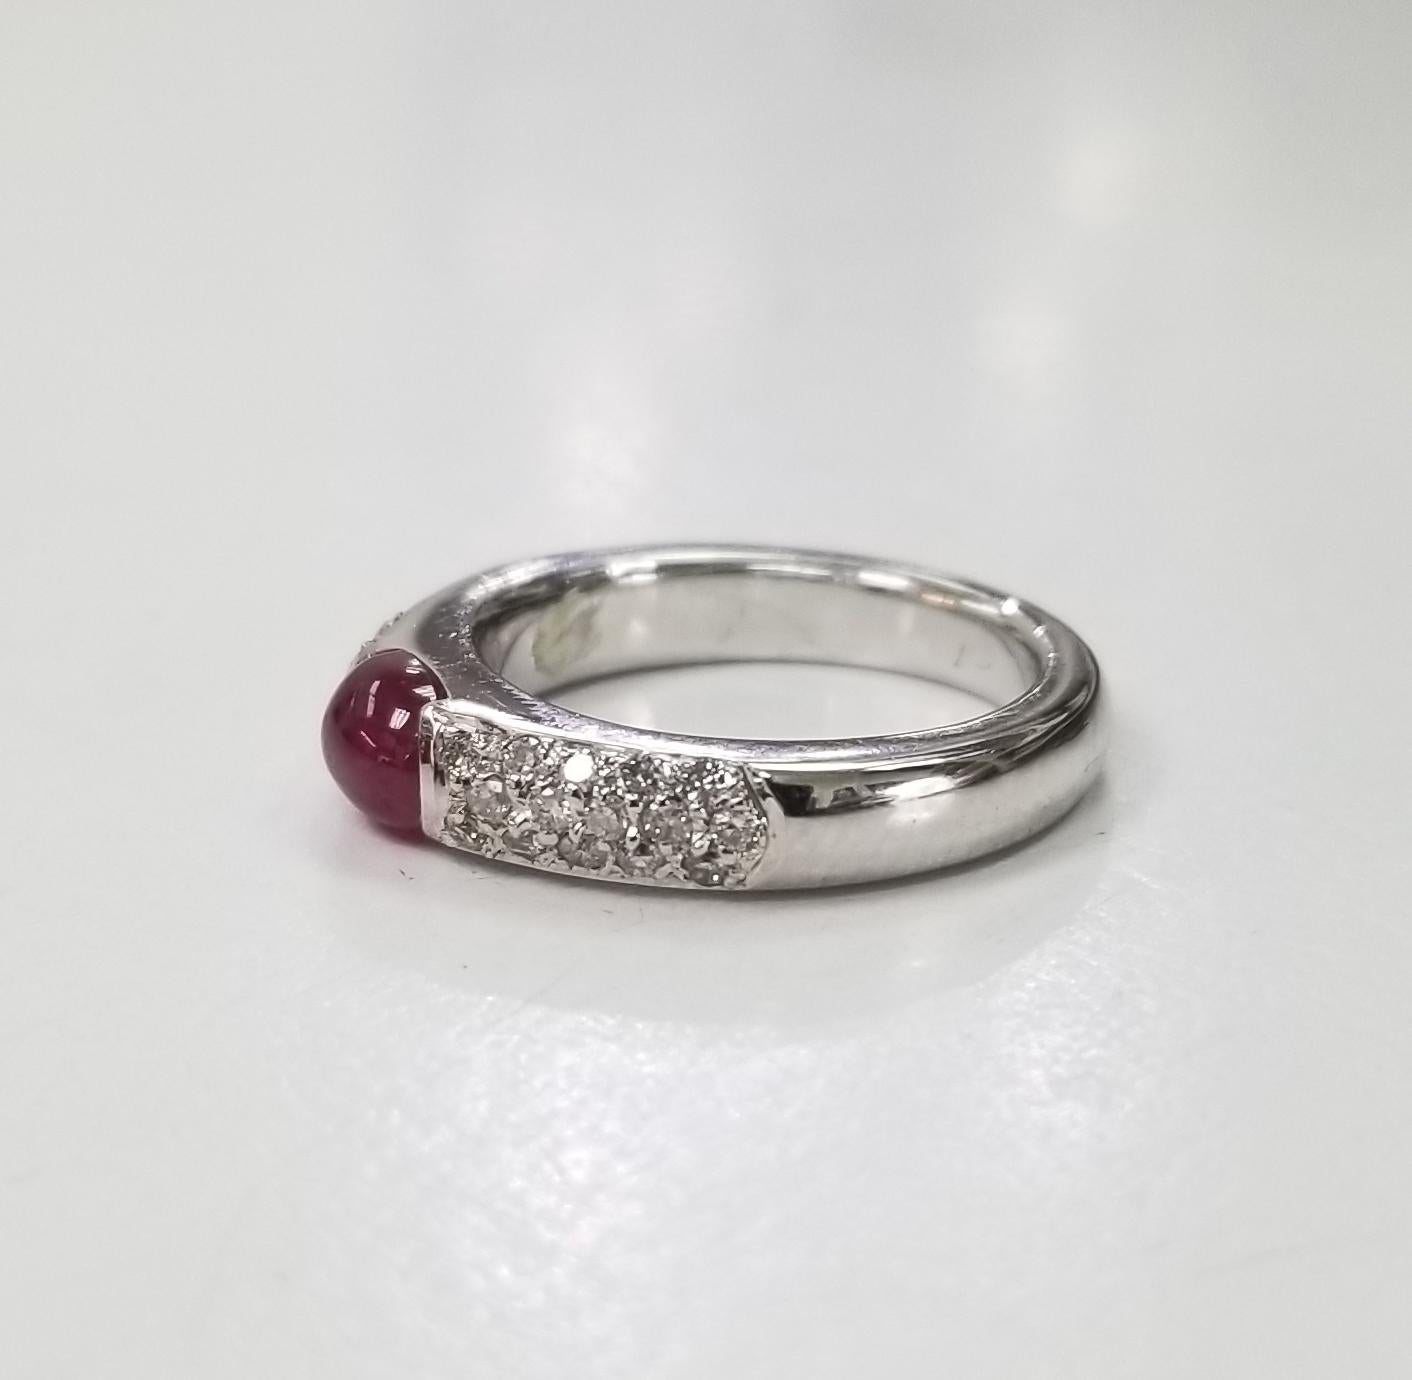 14k white gold ruby and diamond ring containing 1 cabochon cut ruby weighing .98pts. and 36 round full cut diamonds of very fine quality weighing .30pts. set in a 4mm wide ring.  This ring is a size 4.75 but we will size to fit for free.